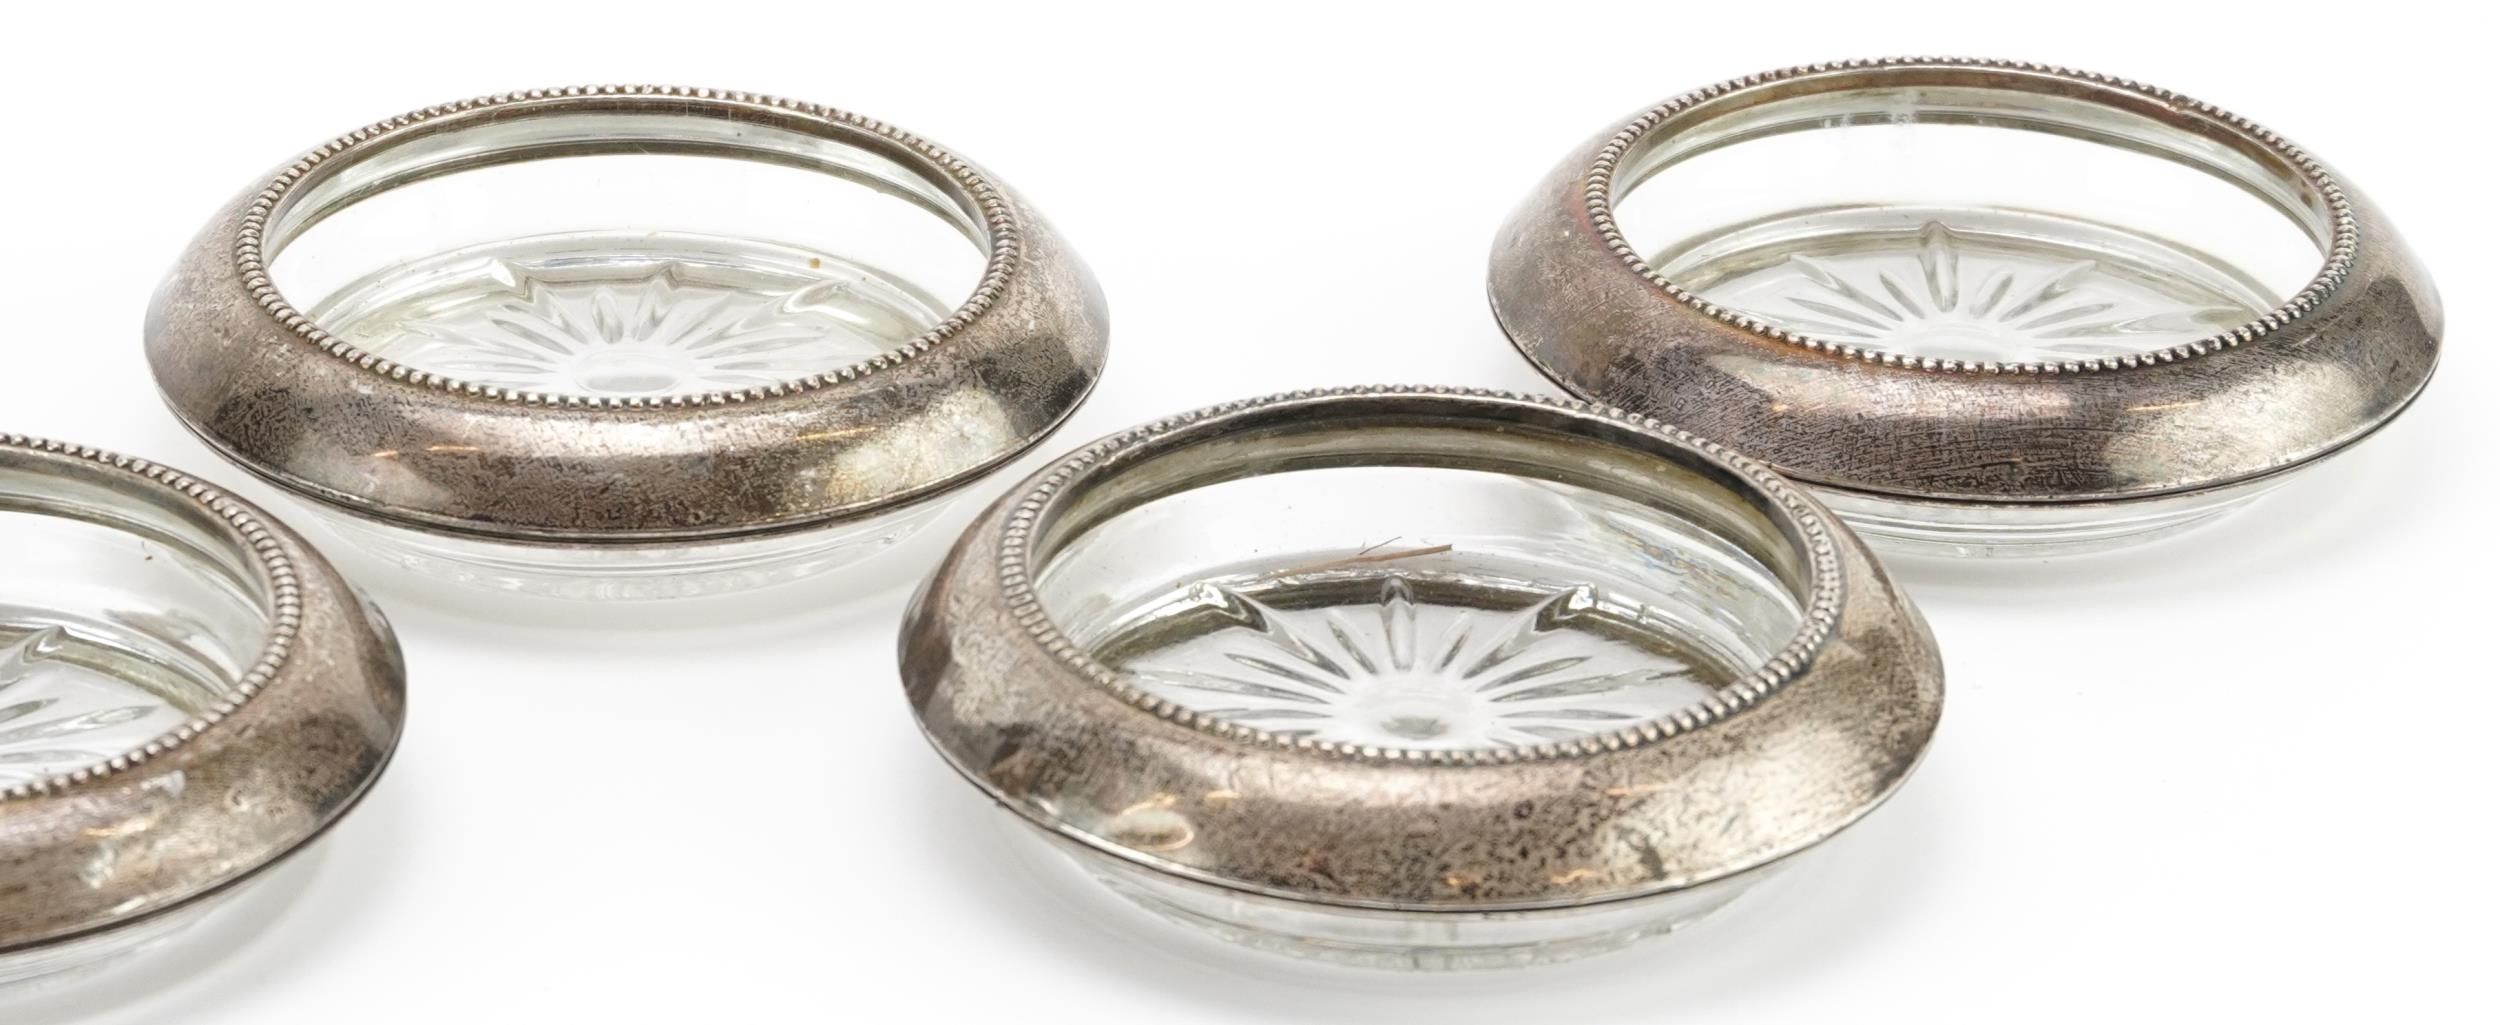 Frank M Whiting, set of seven circular sterling silver mounted dishes, 10cm in diameter - Image 3 of 4